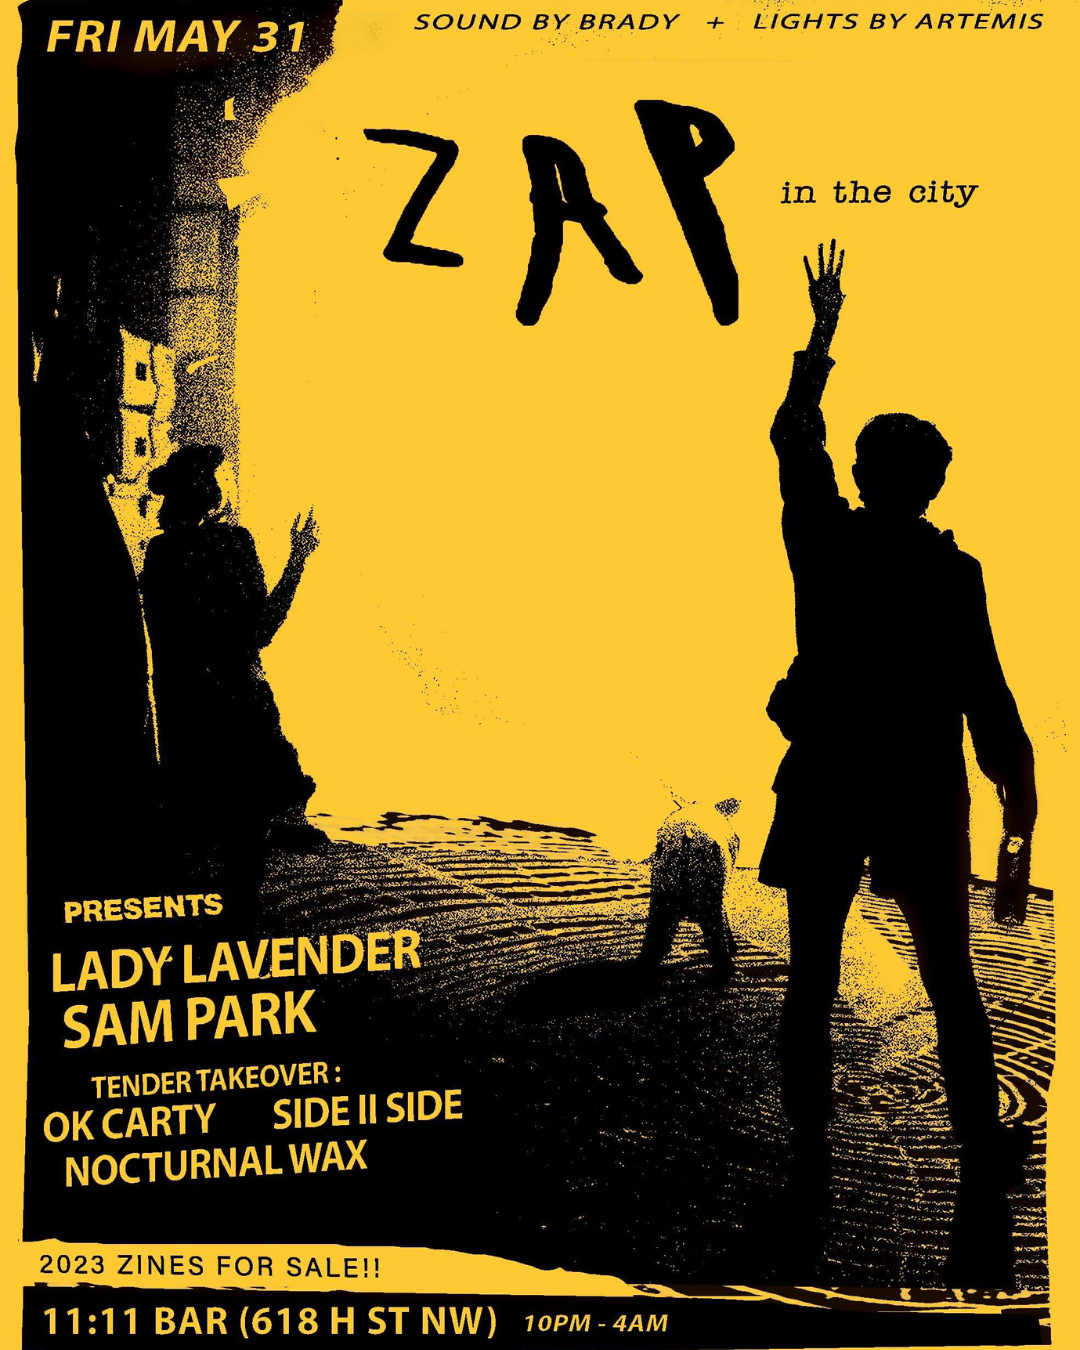 ZAP in the city - フライヤー表